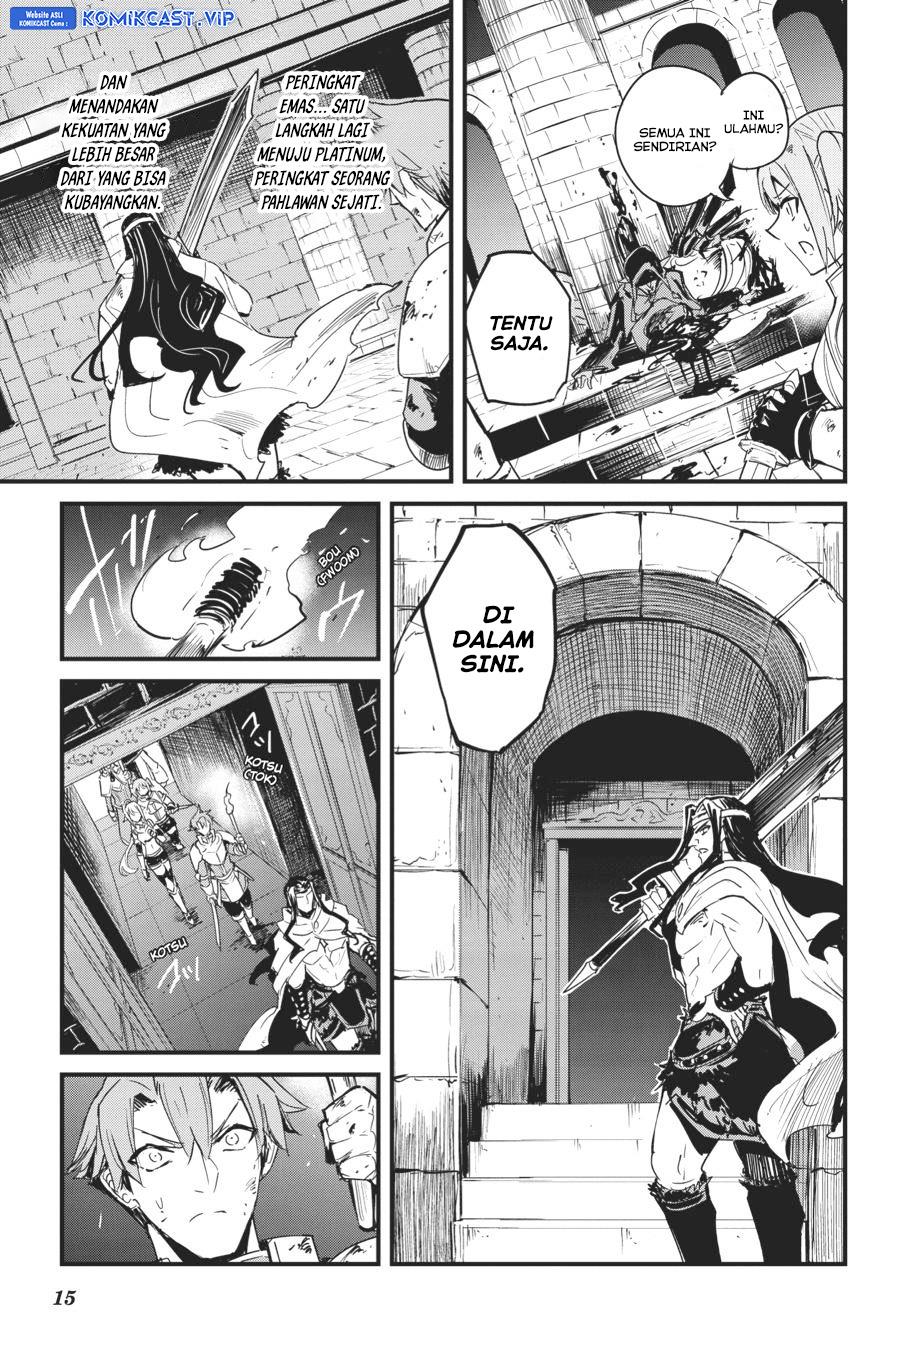 Goblin Slayer: Side Story Year One Chapter 68